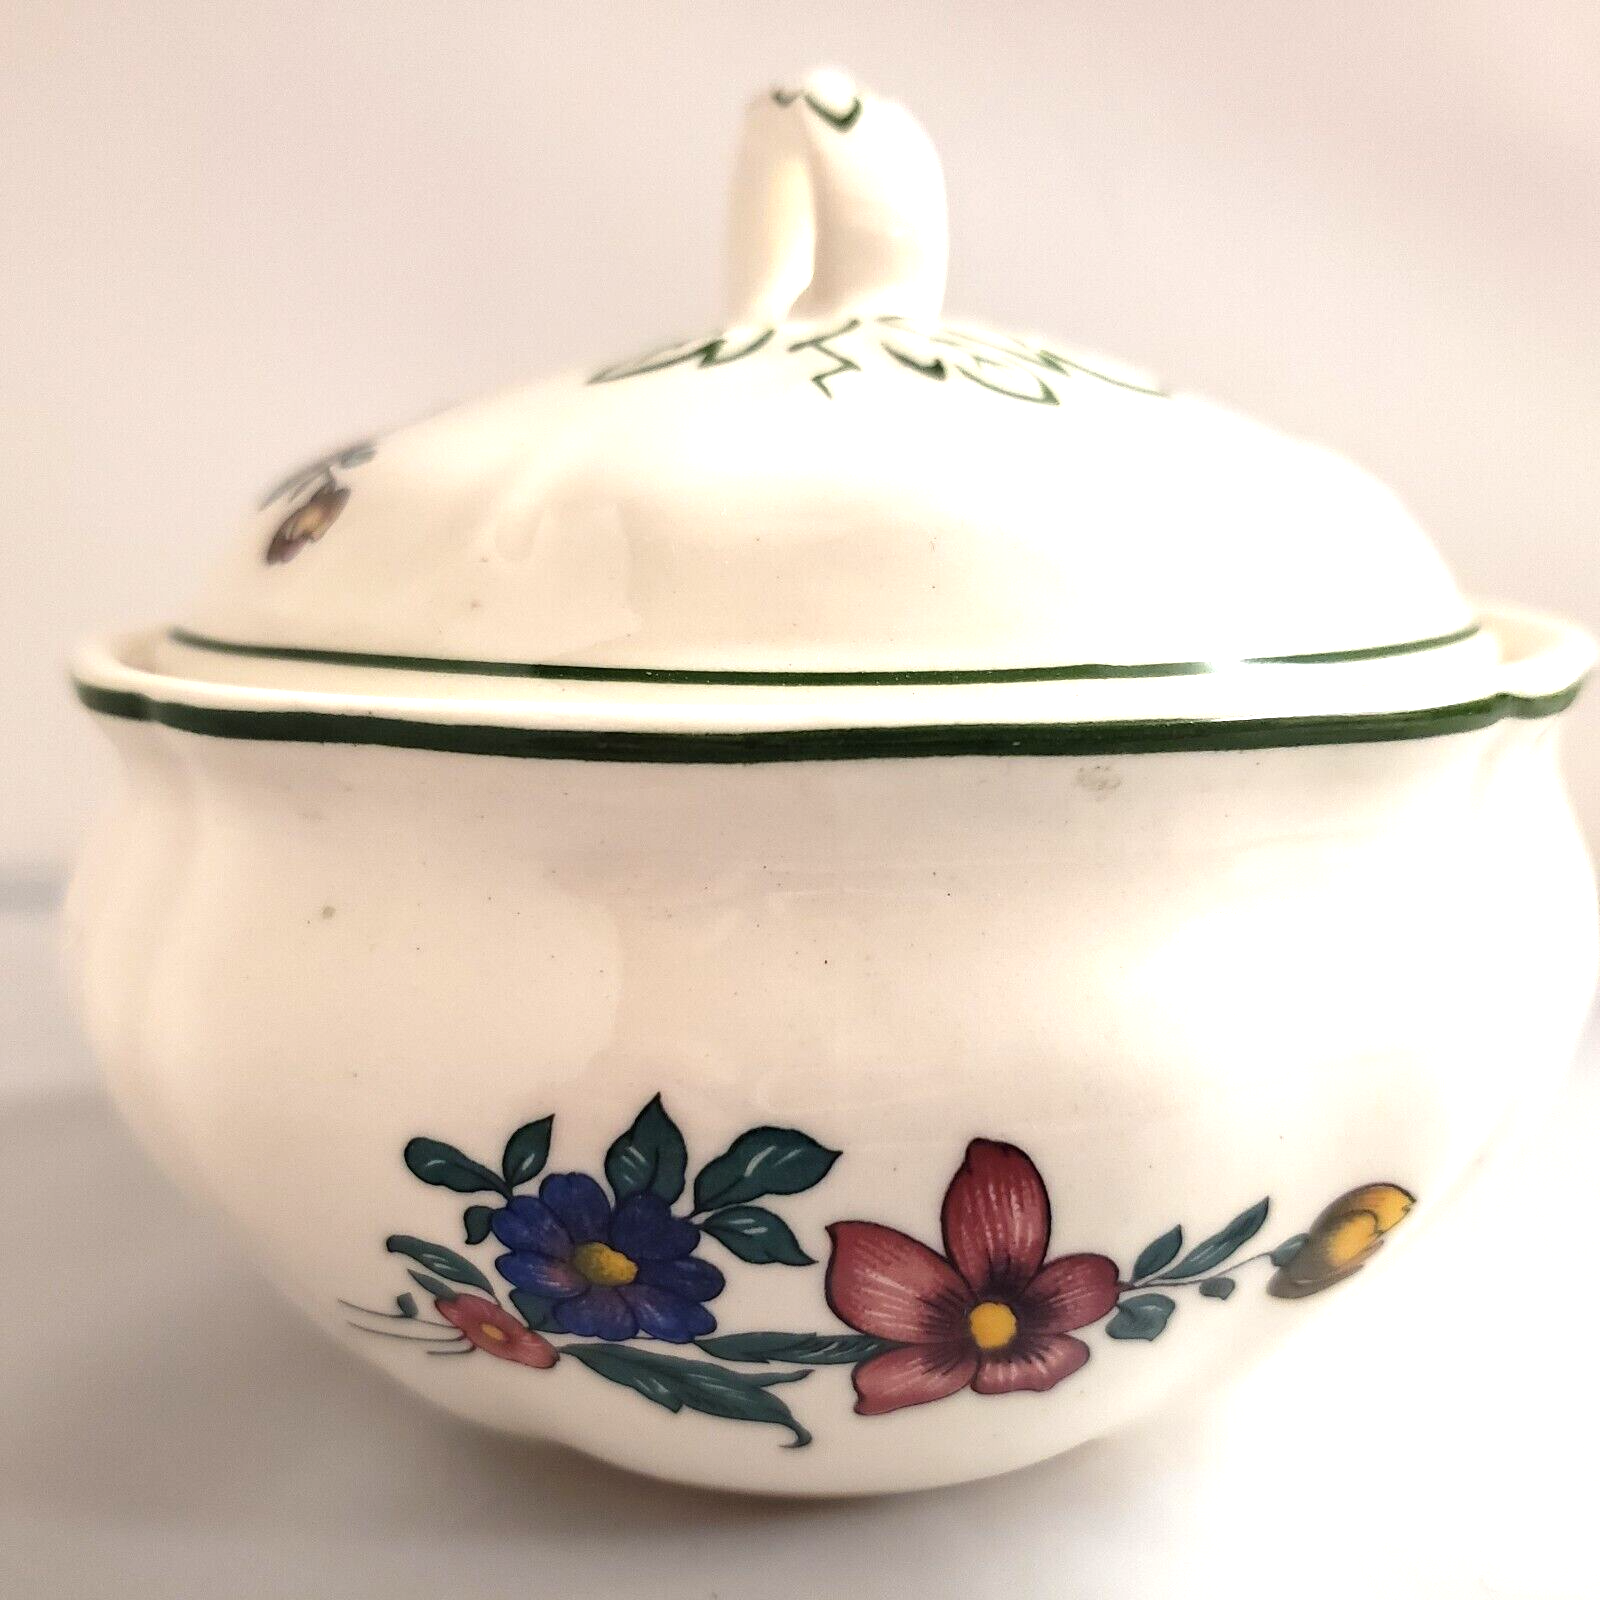 Villeroy & Boch Alt Strassburg Jam/Jelly With Lid Made in Germany - $28.05